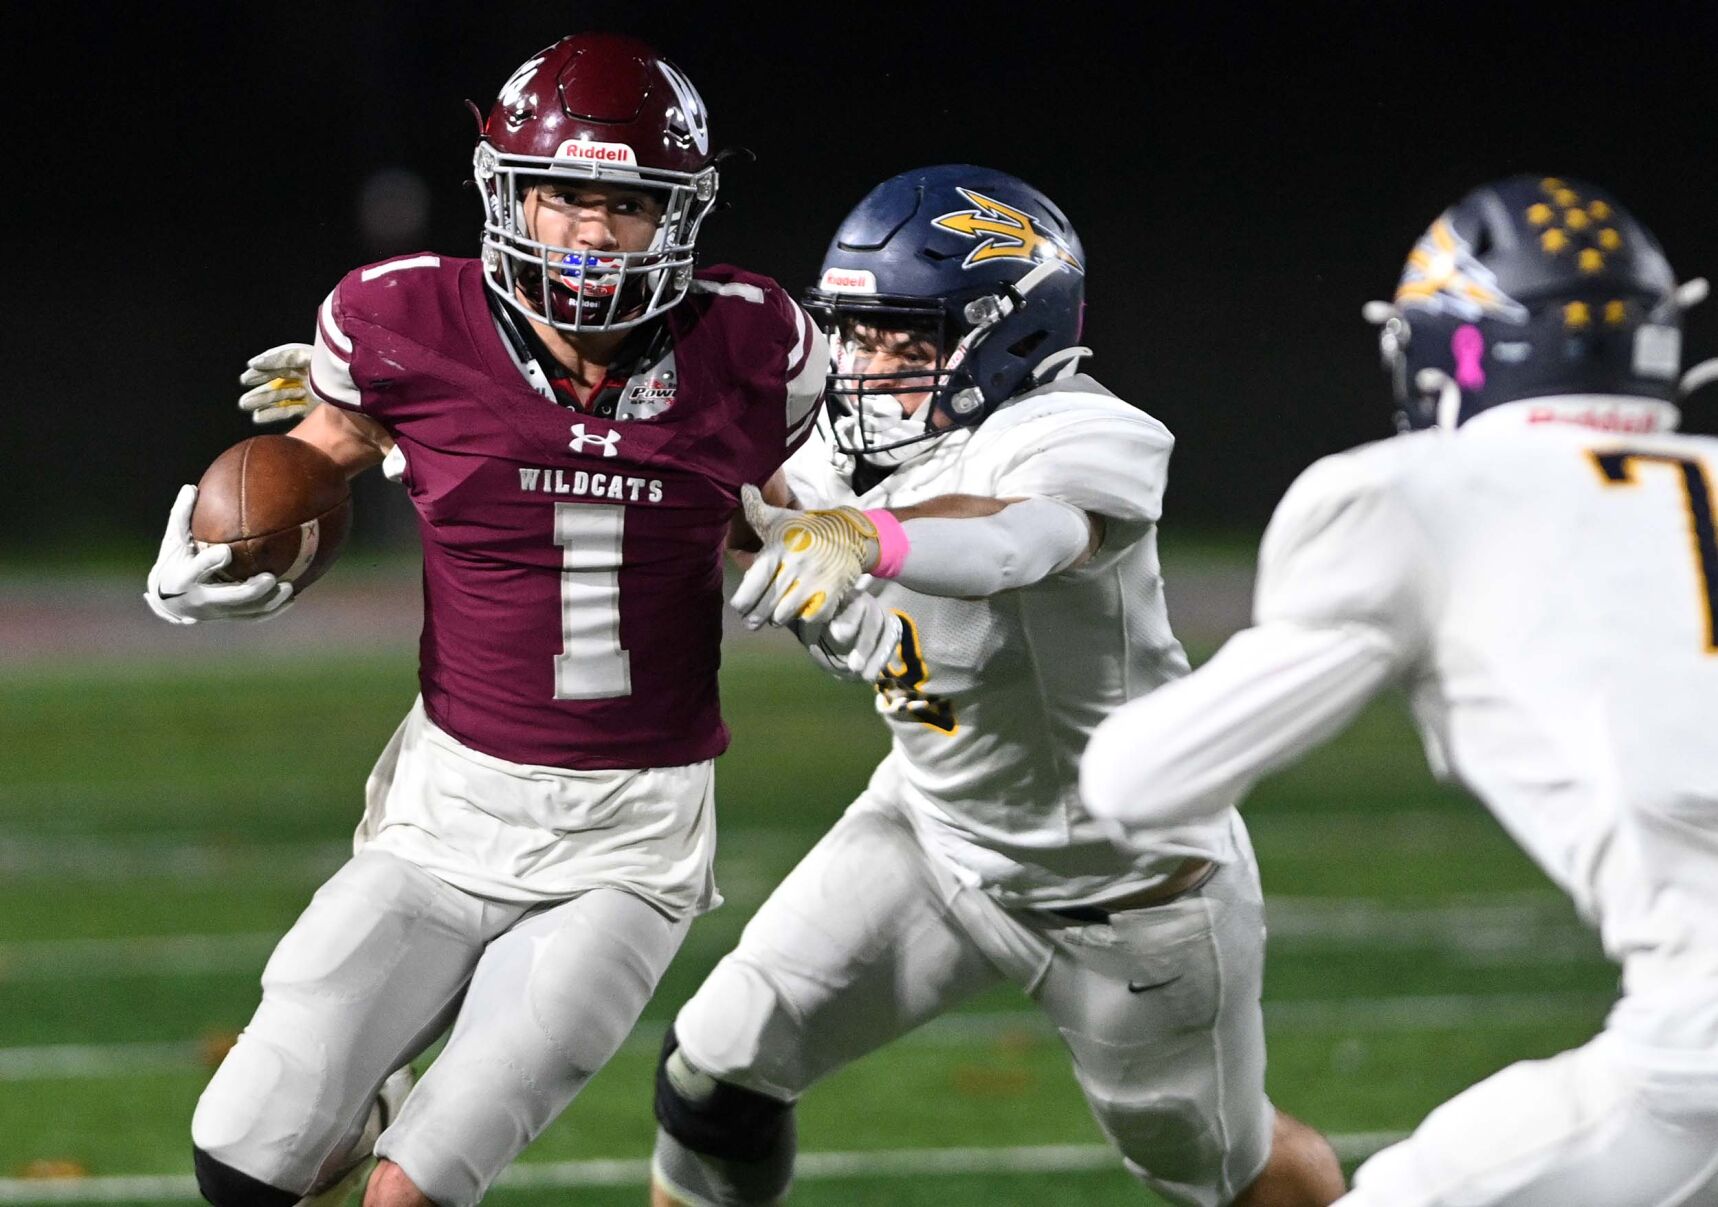 Cole Bartram, Nathan Lusk, and Josh Smith Earn Spots on 2023 Pennsylvania Football Writers’ Association Class 5A All-State Team